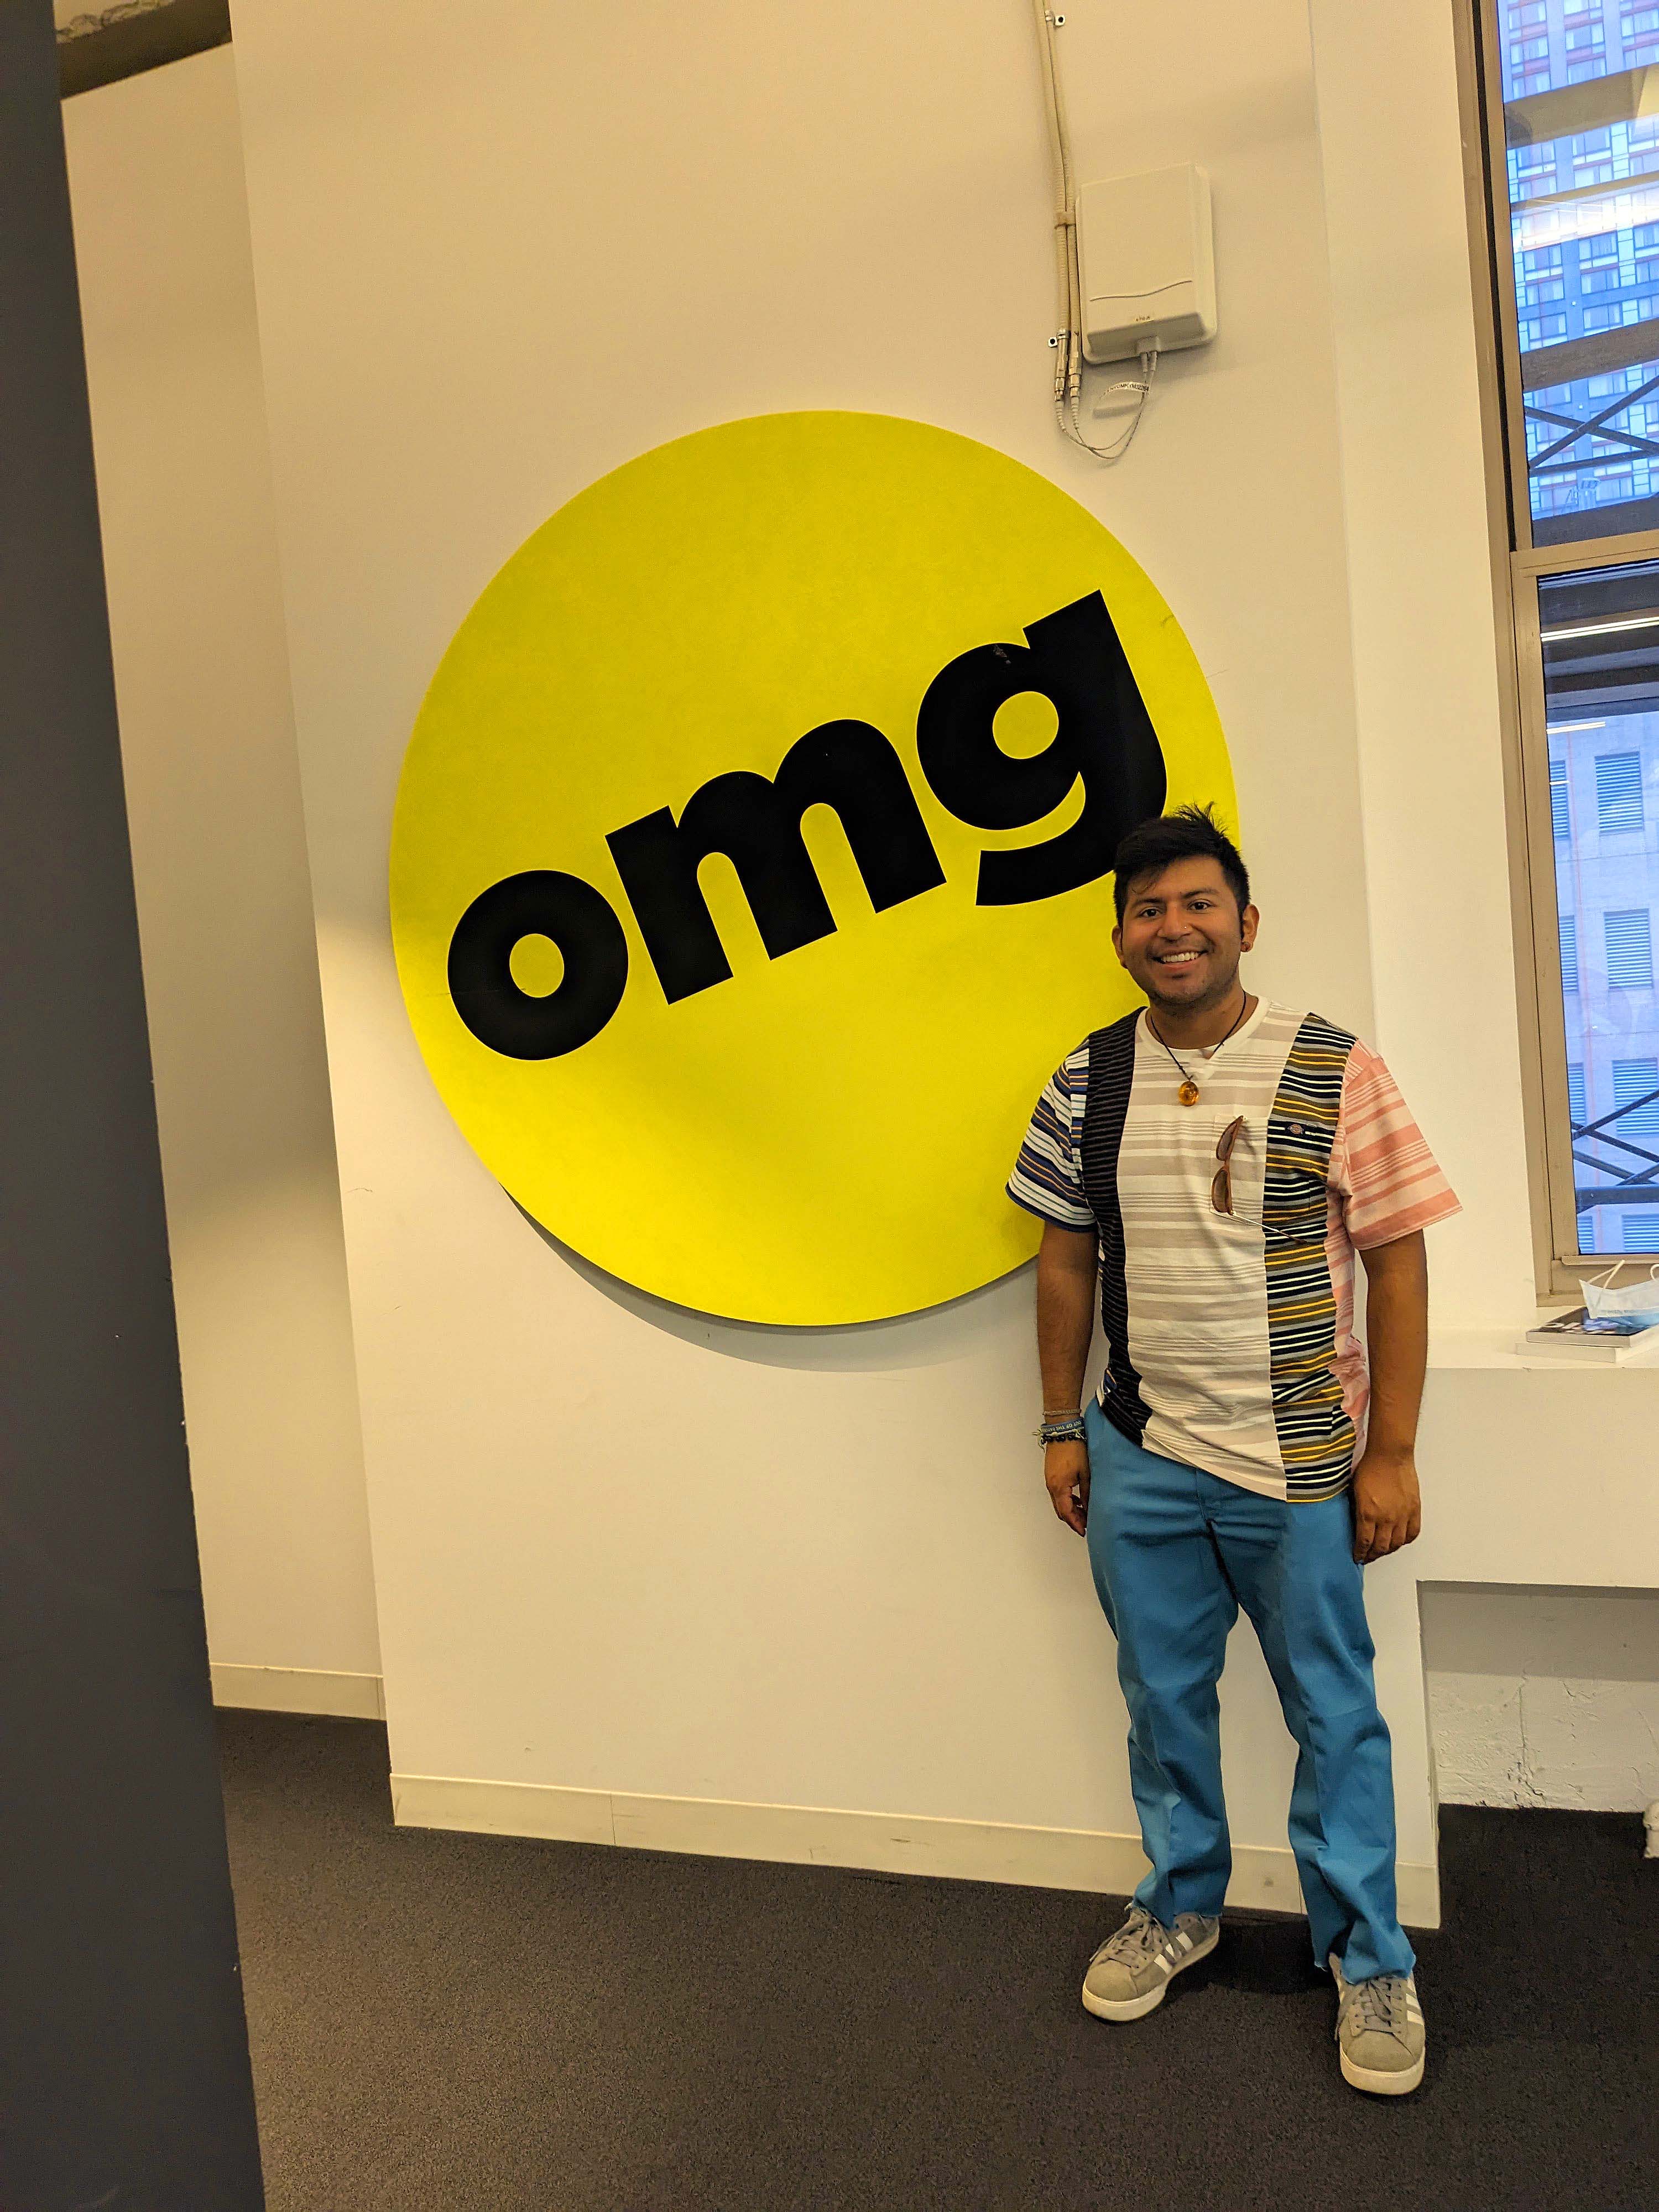 Pablo in the Buzzfeed Office